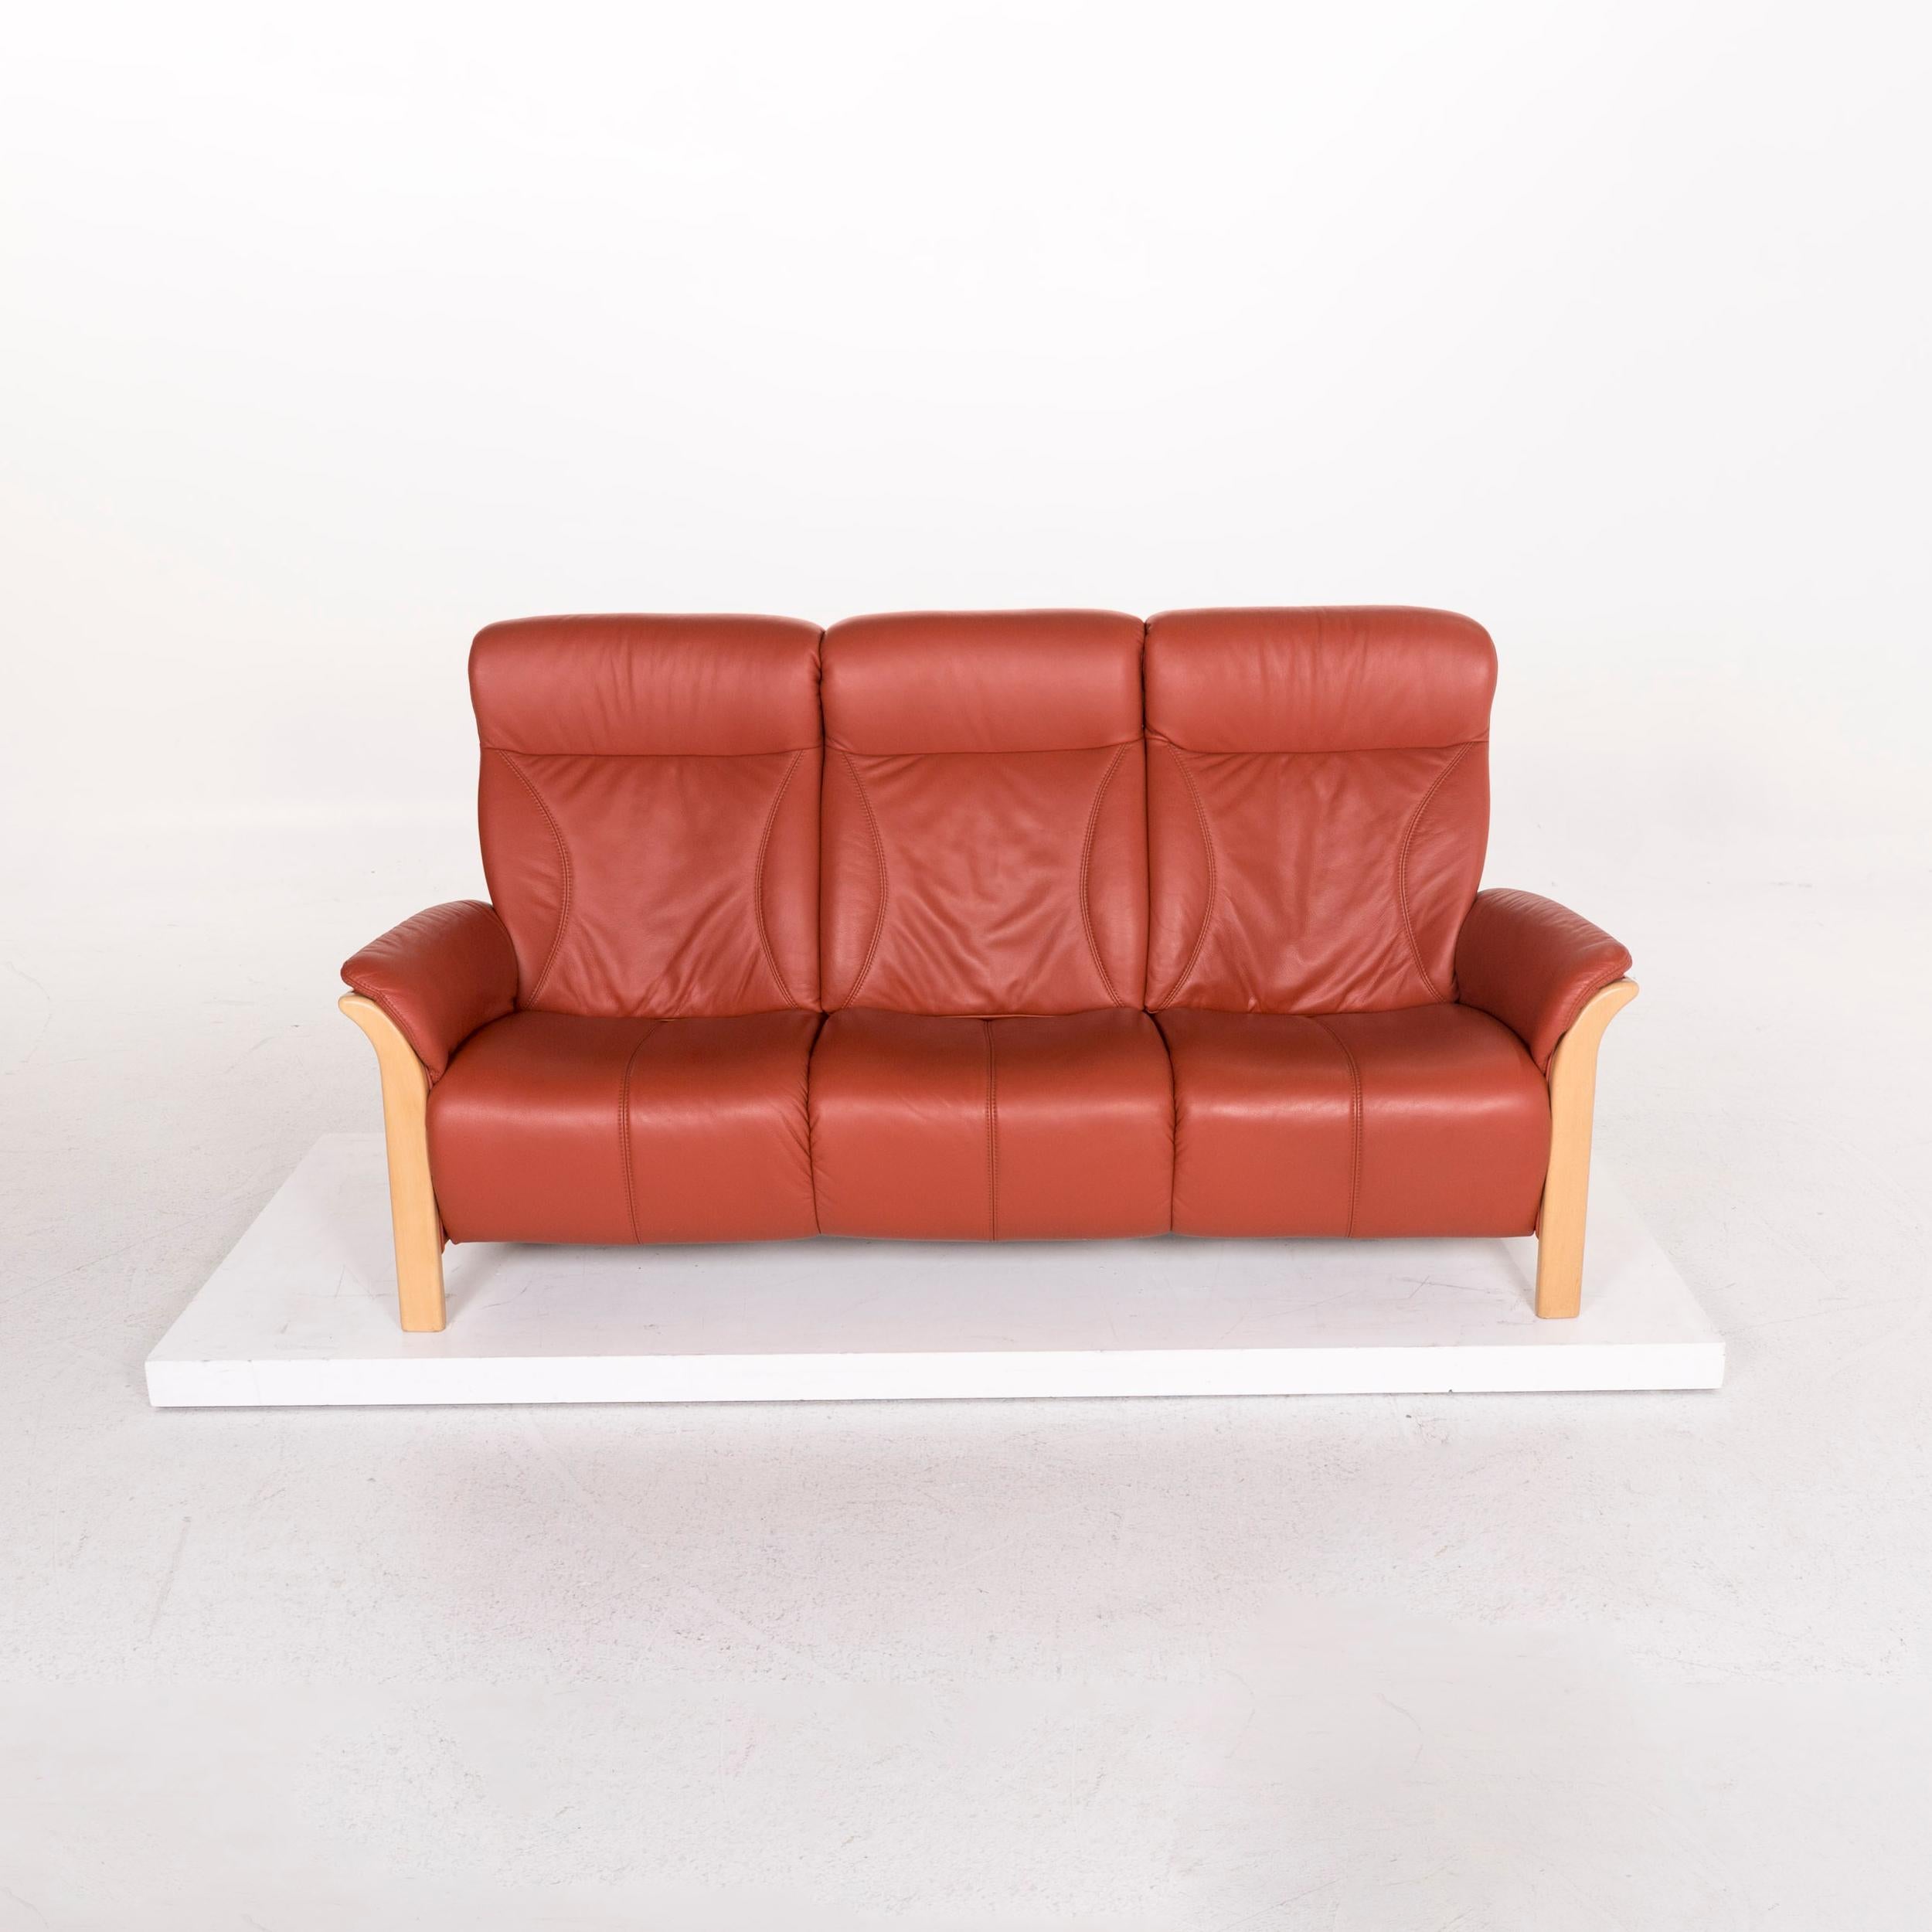 Contemporary Himolla Windsor Leather Sofa Red Three-Seat Couch For Sale